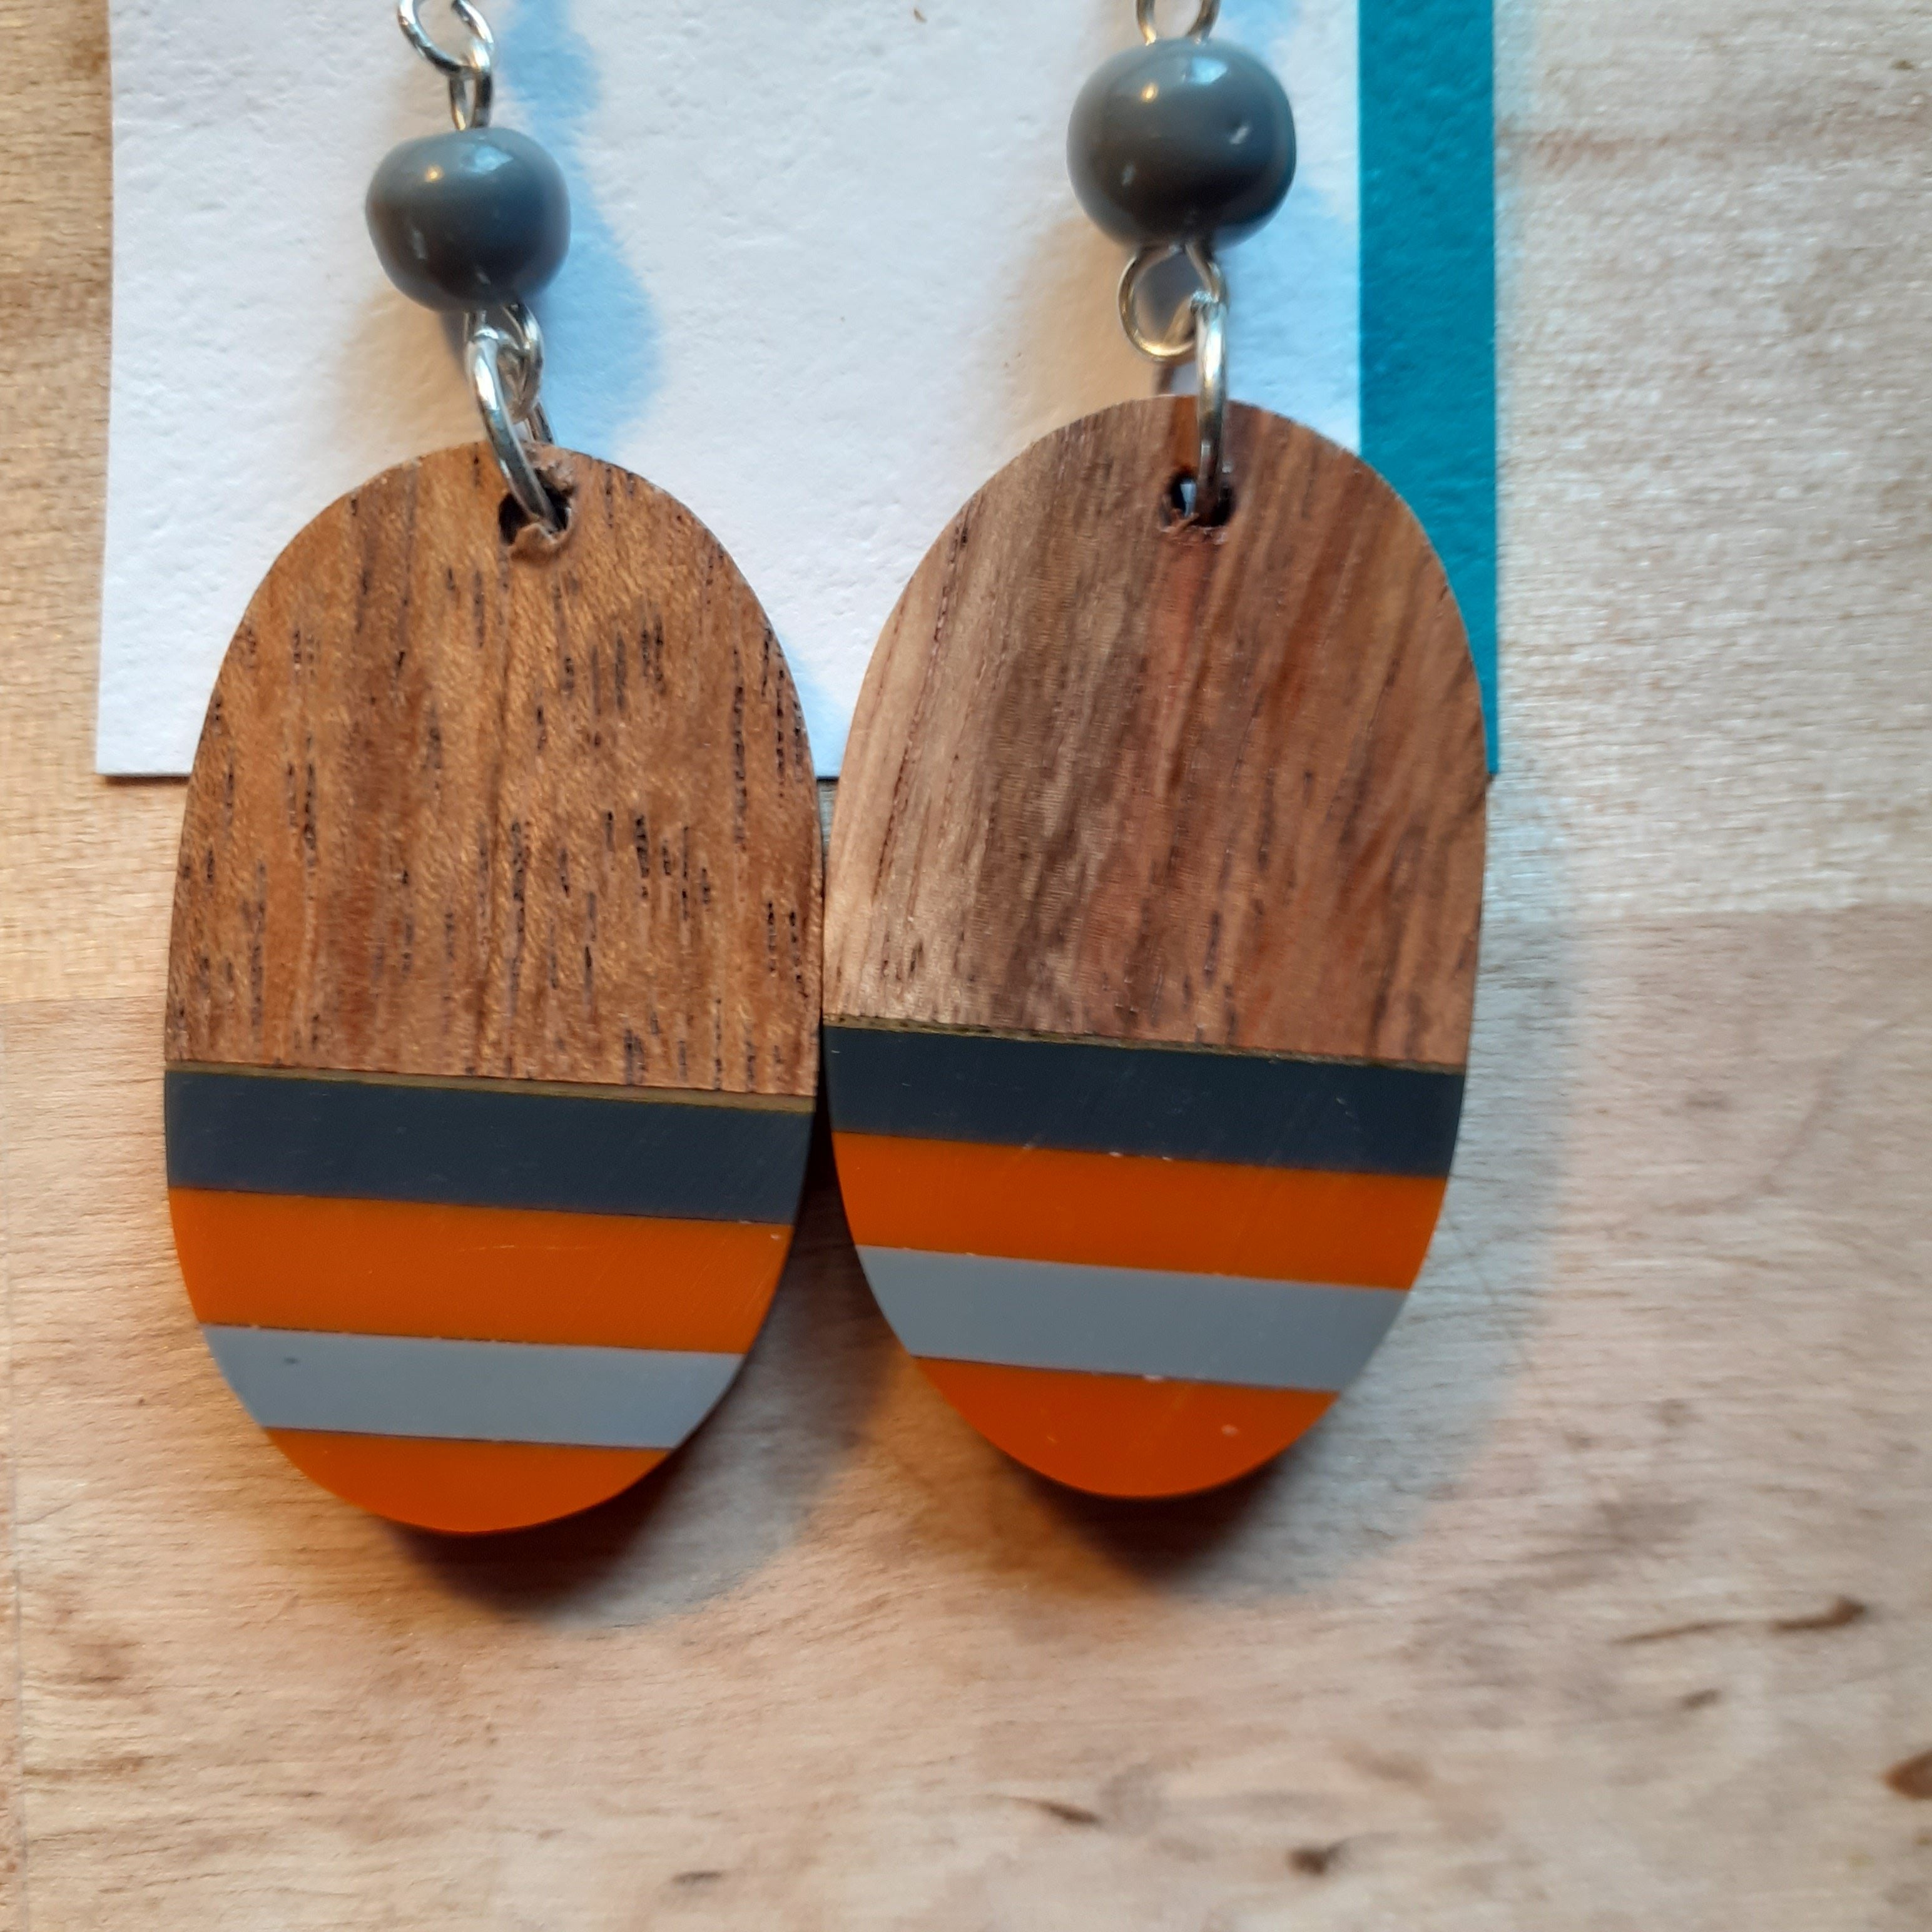 Oval Resin and Wood Earrings - Orange and Copper - Luvit!